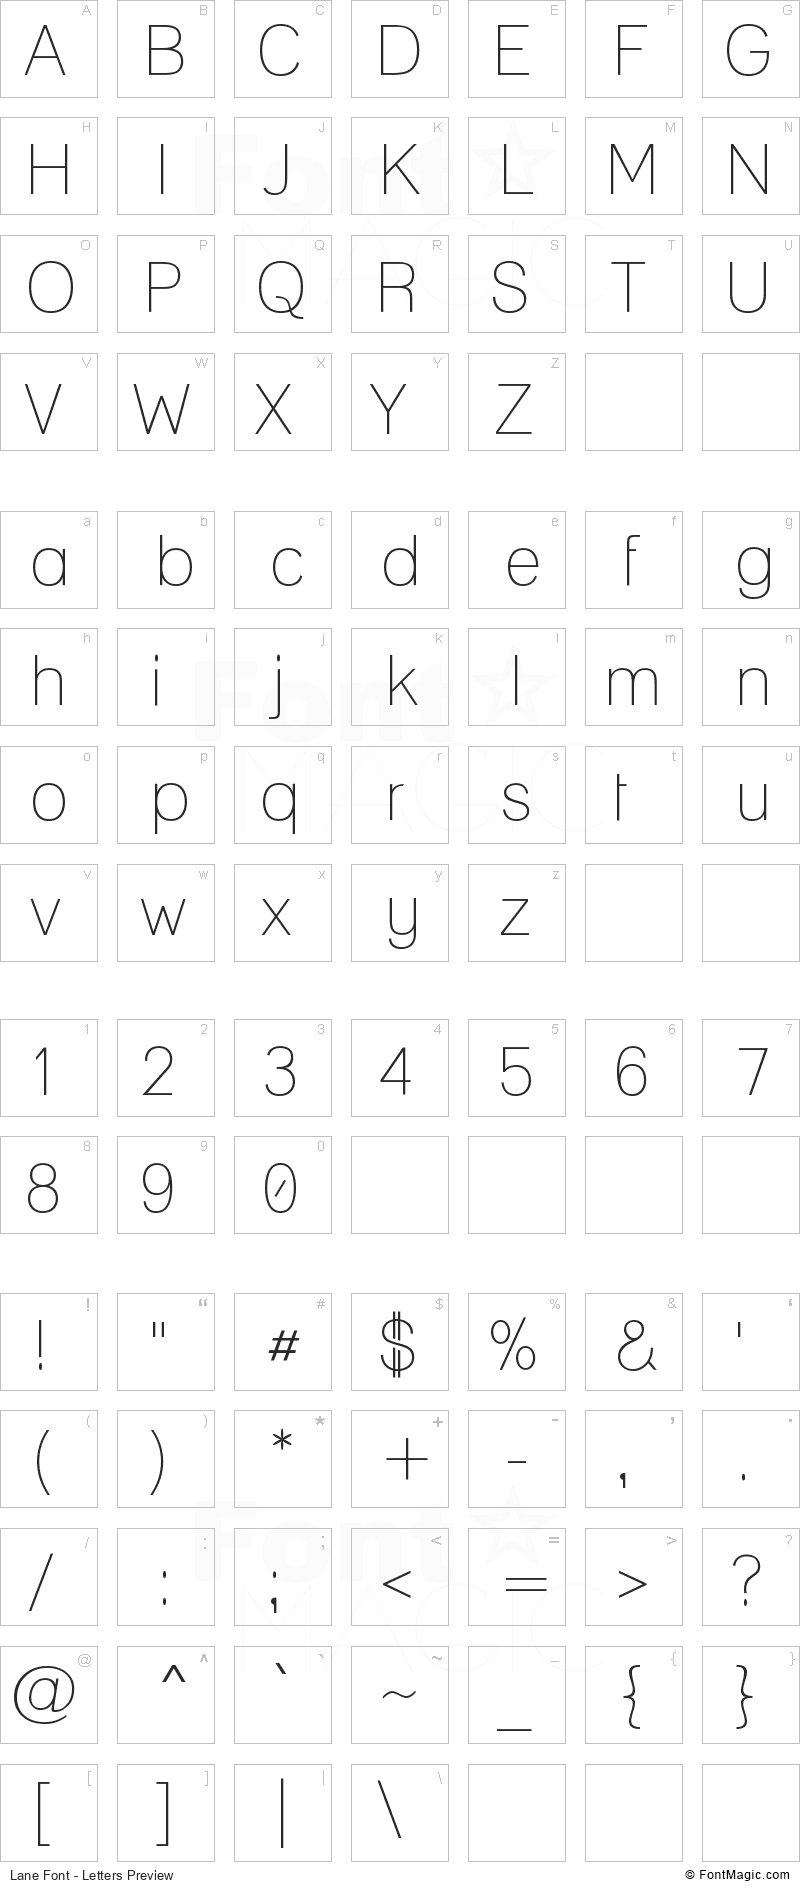 Lane Font - All Latters Preview Chart